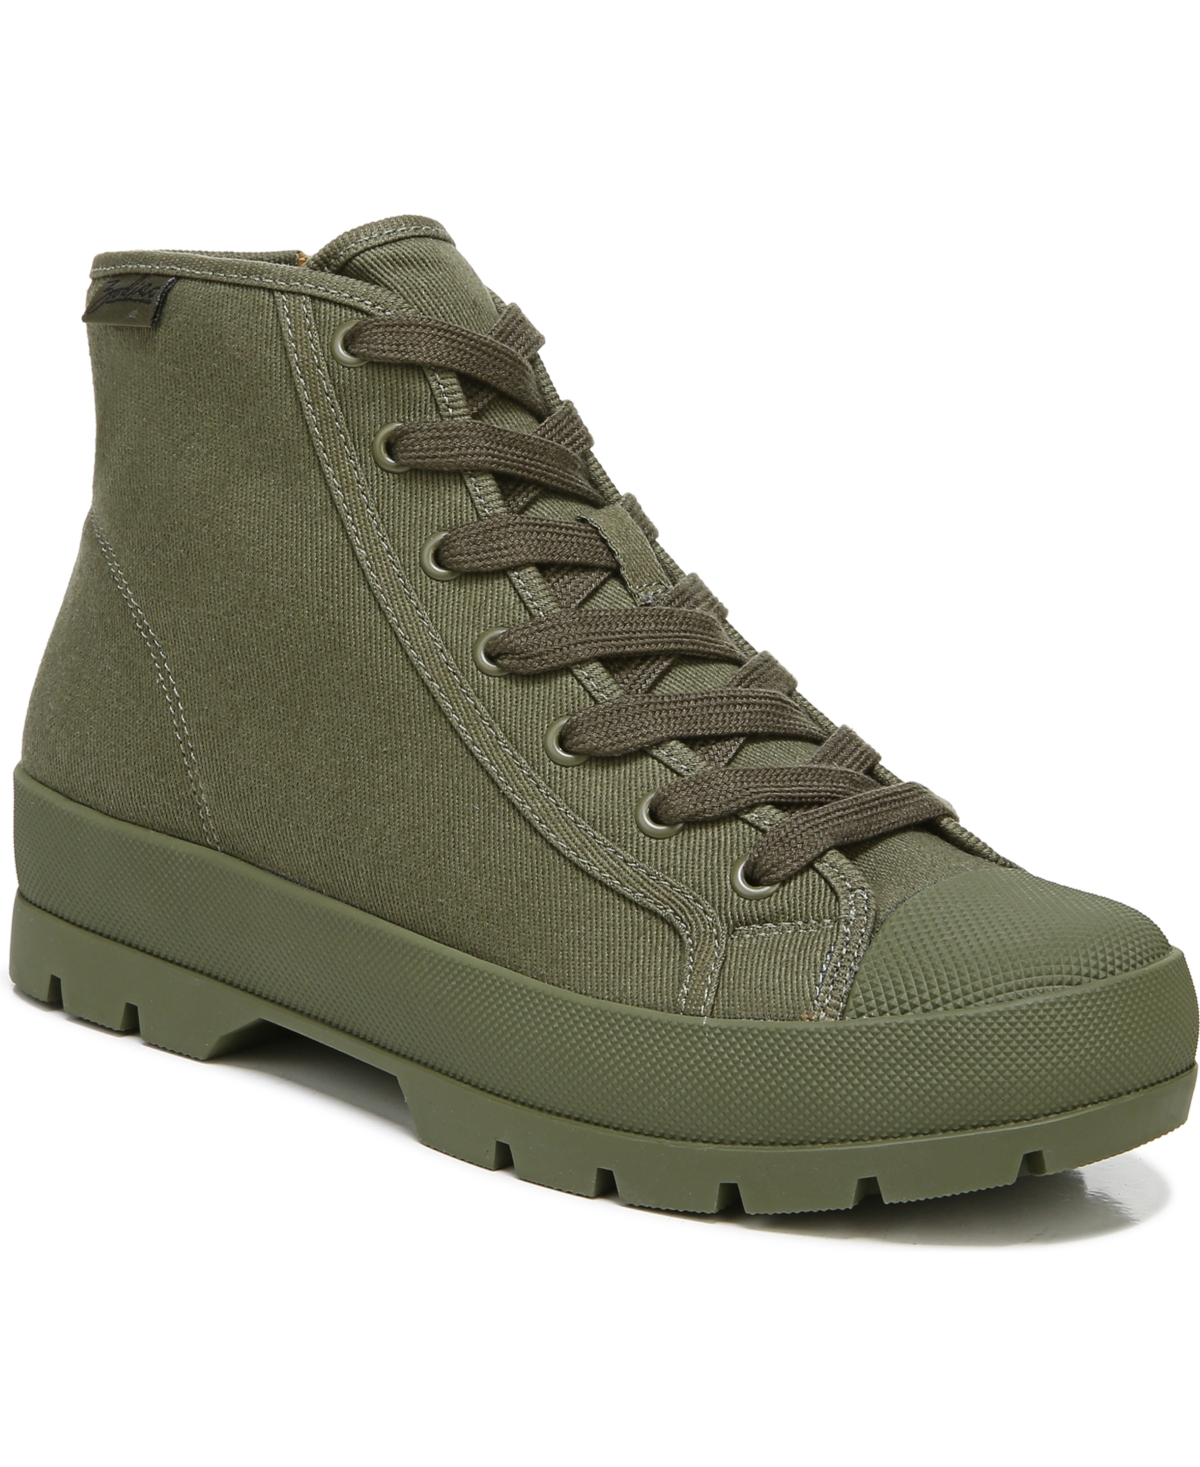 Women's Ludlow Bootie High Top Lace-Up Sneakers - Fog Twill Canvas